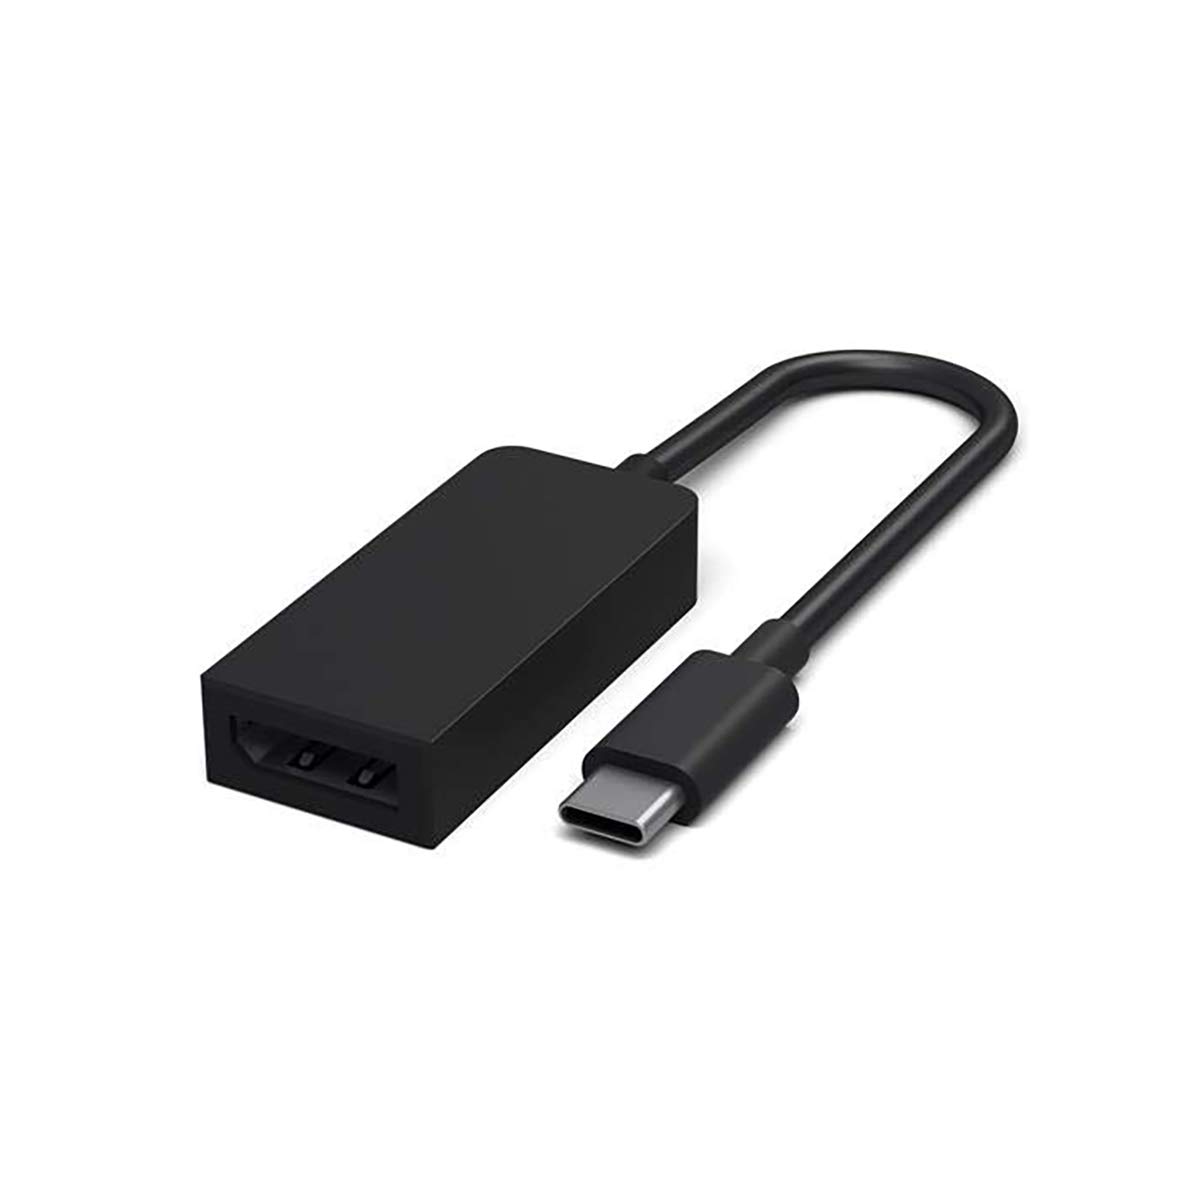 ADAPTER USB-C TO DP ALL DEVICES UPC 0889842287233 - MICROSOFT